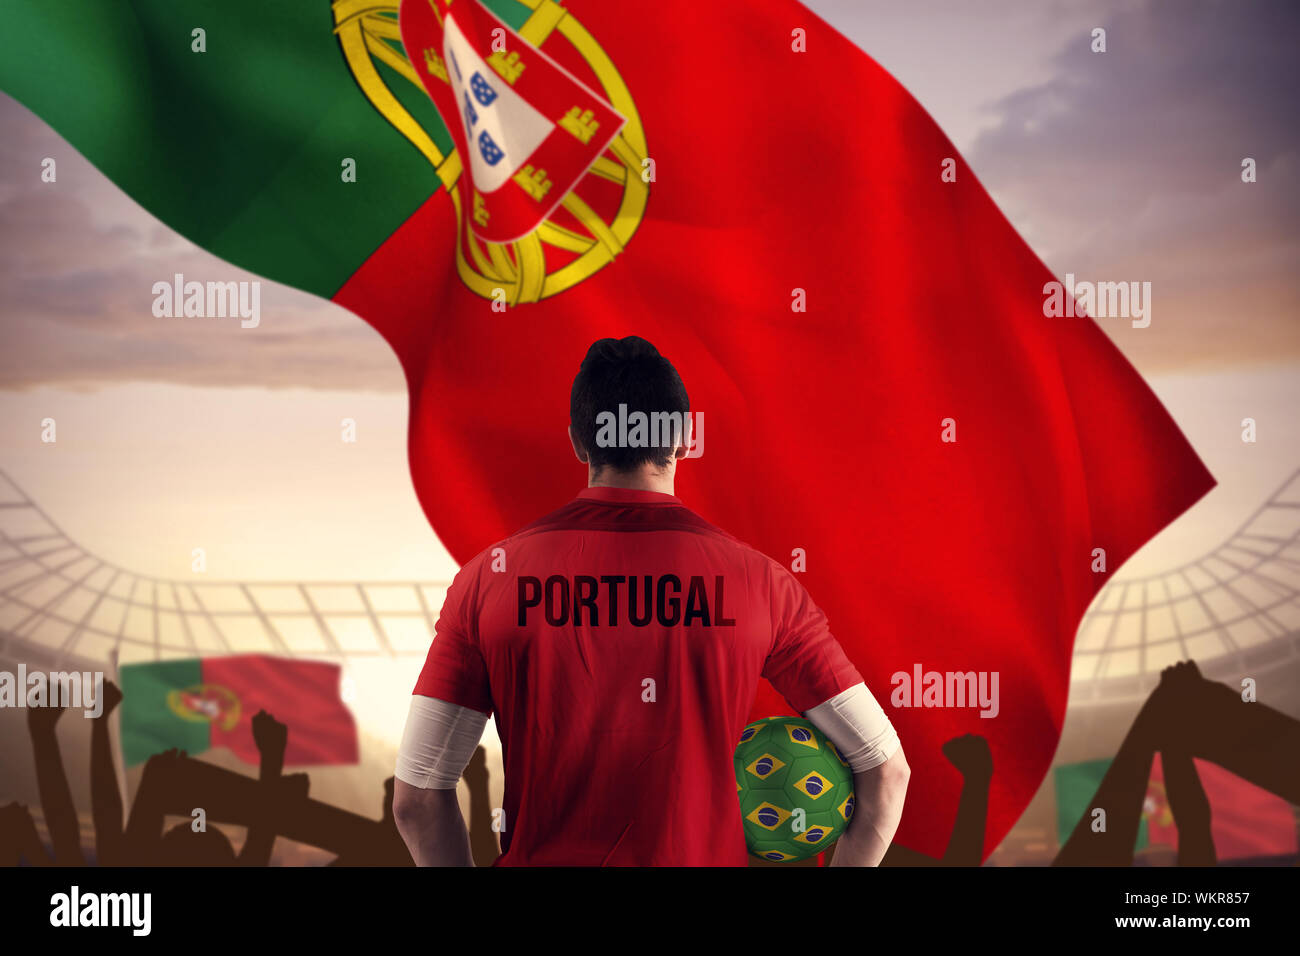 Portugal football player holding ball against large football stadium under cloudy blue sky Stock Photo